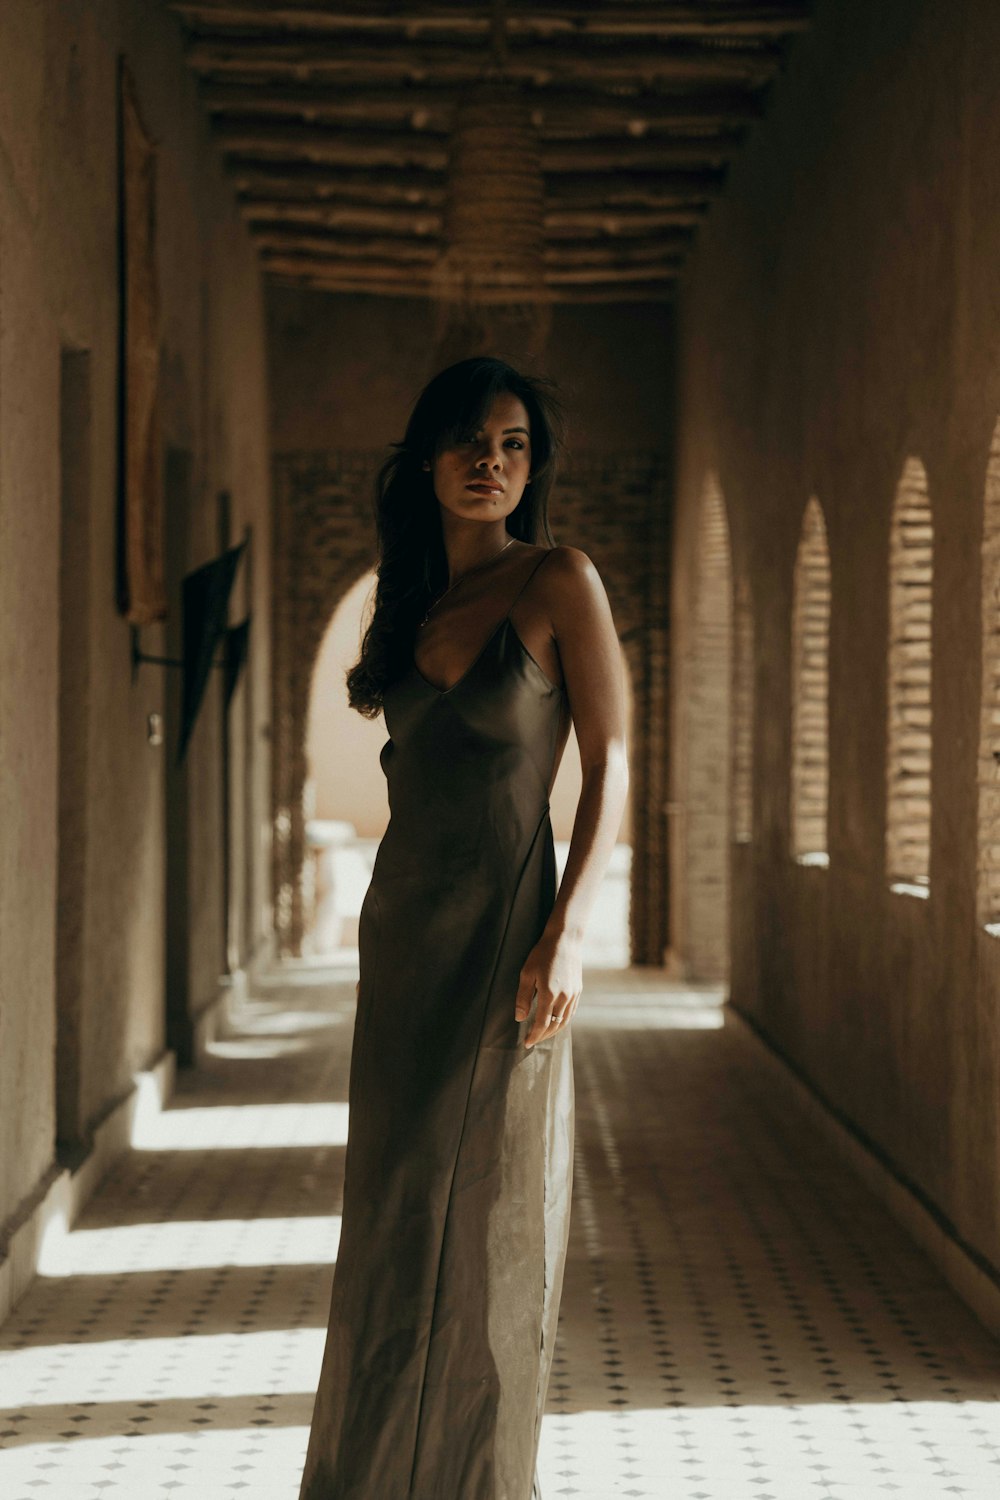 a woman in a long dress standing in a hallway